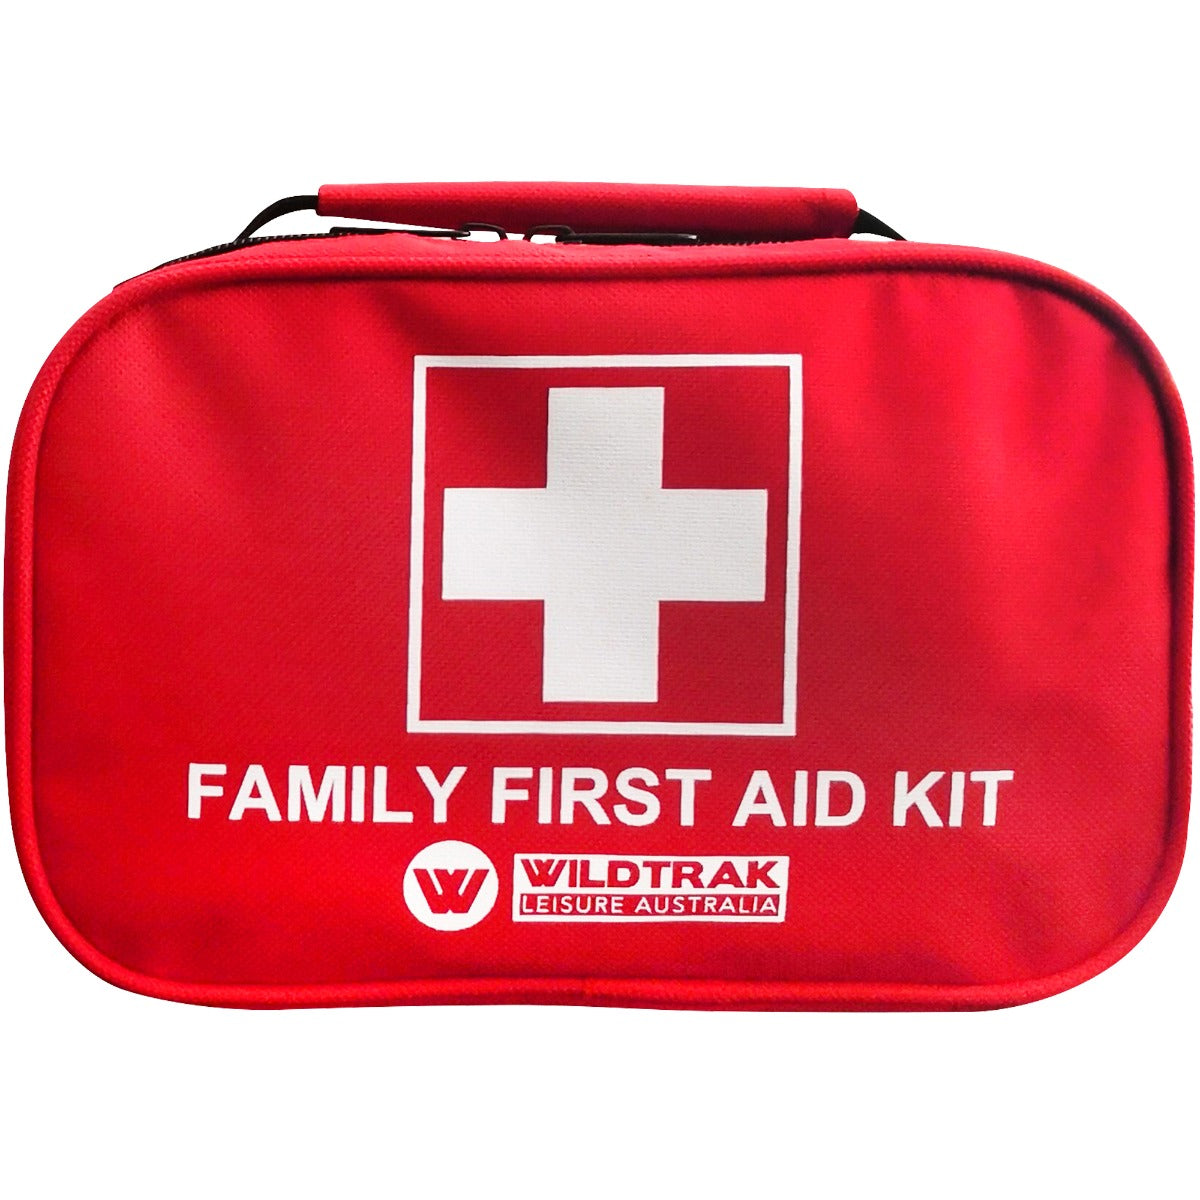 FAMILY FIRST AID KIT 80 PIECE